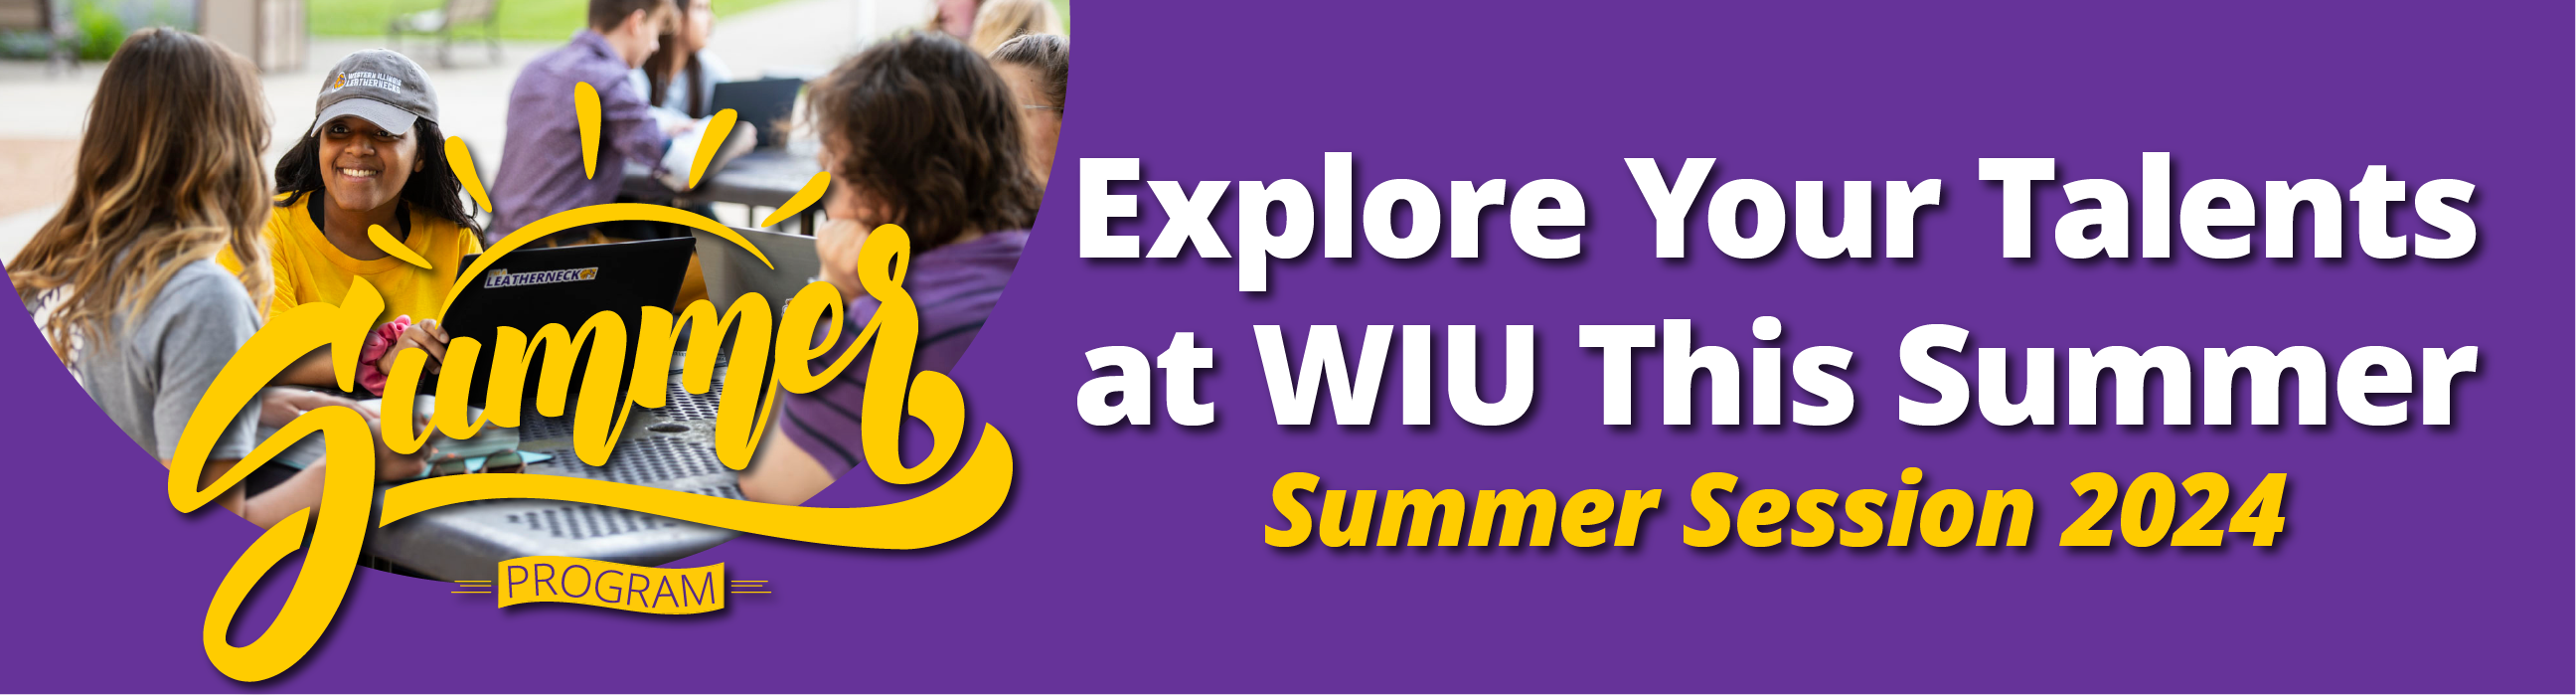 Explore Your Talents at WIU This Summer